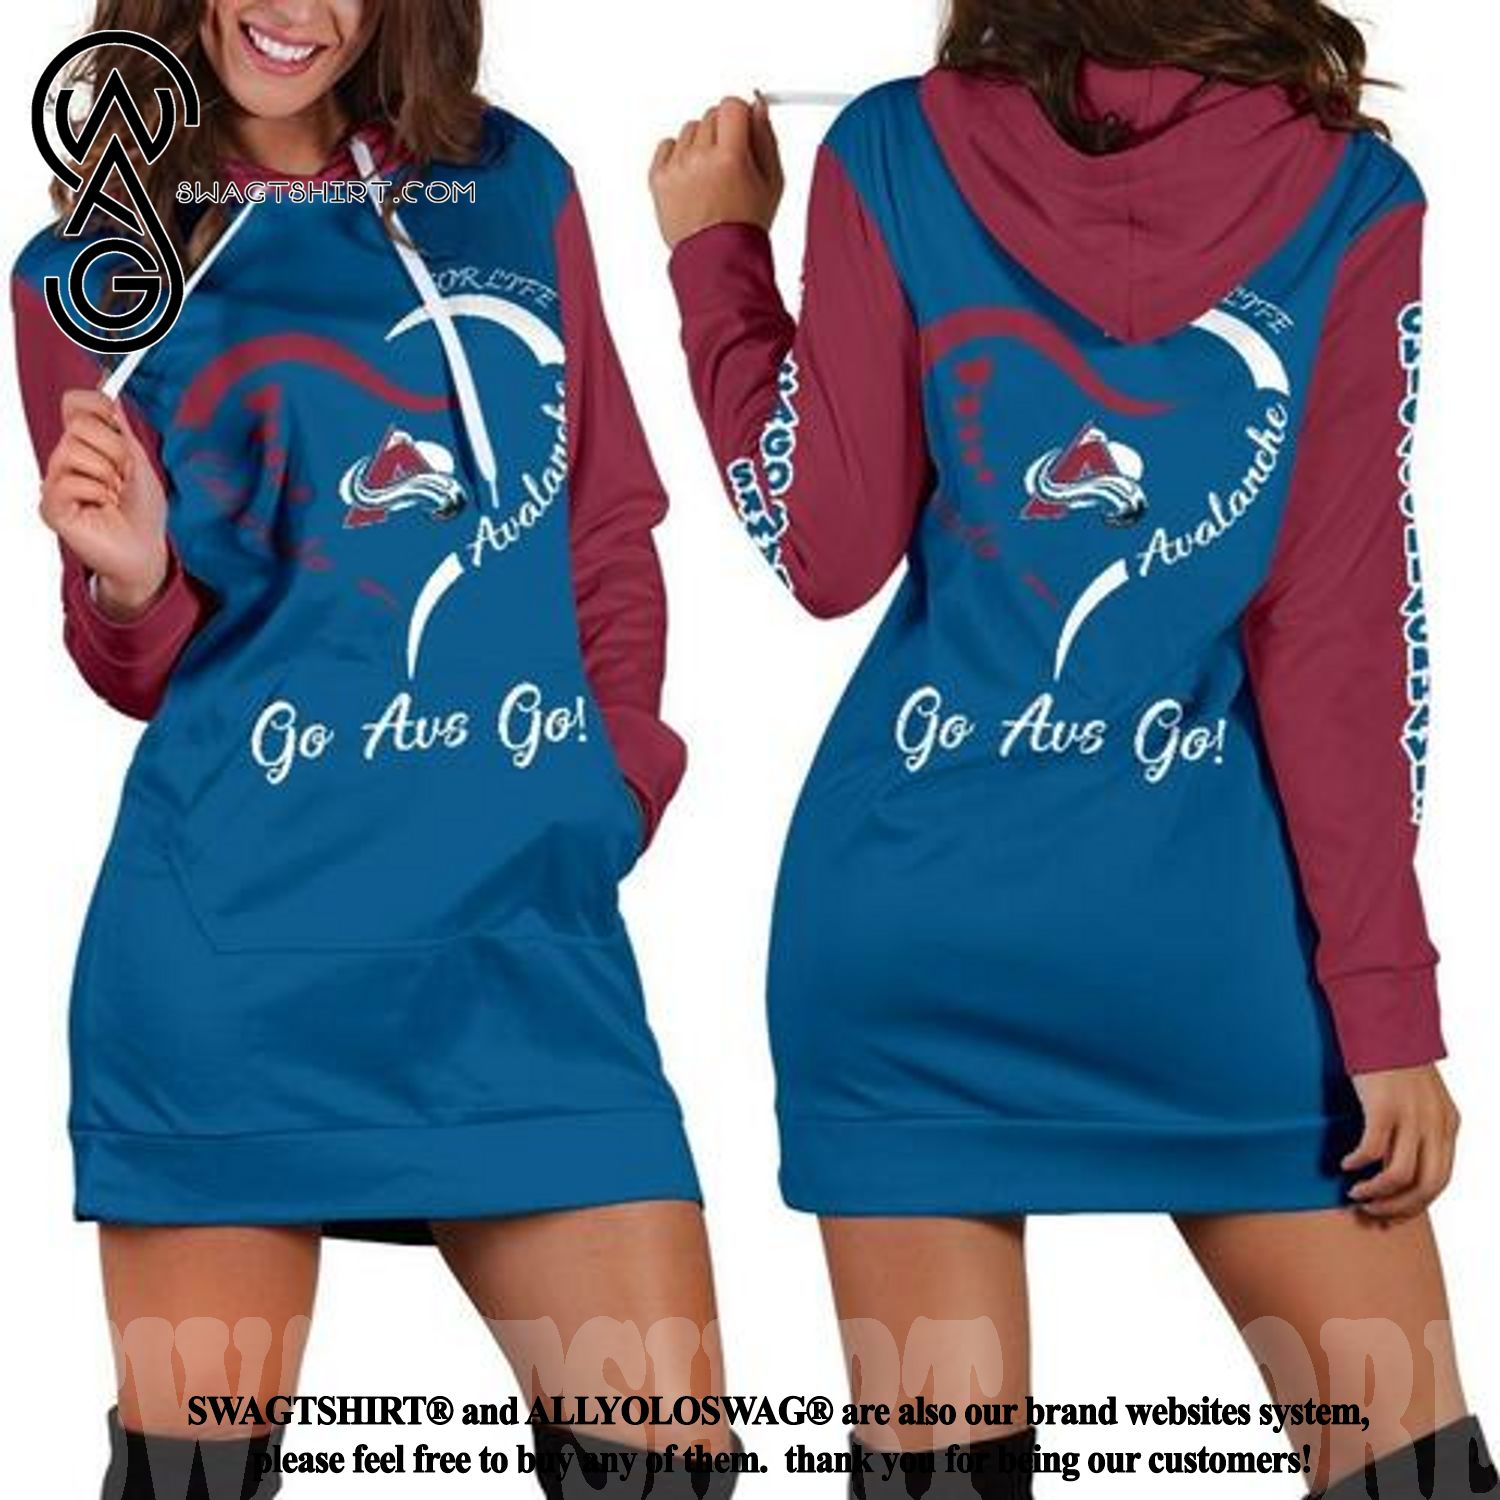 Avalanche Ladies Alternate Skate Lace Hoody